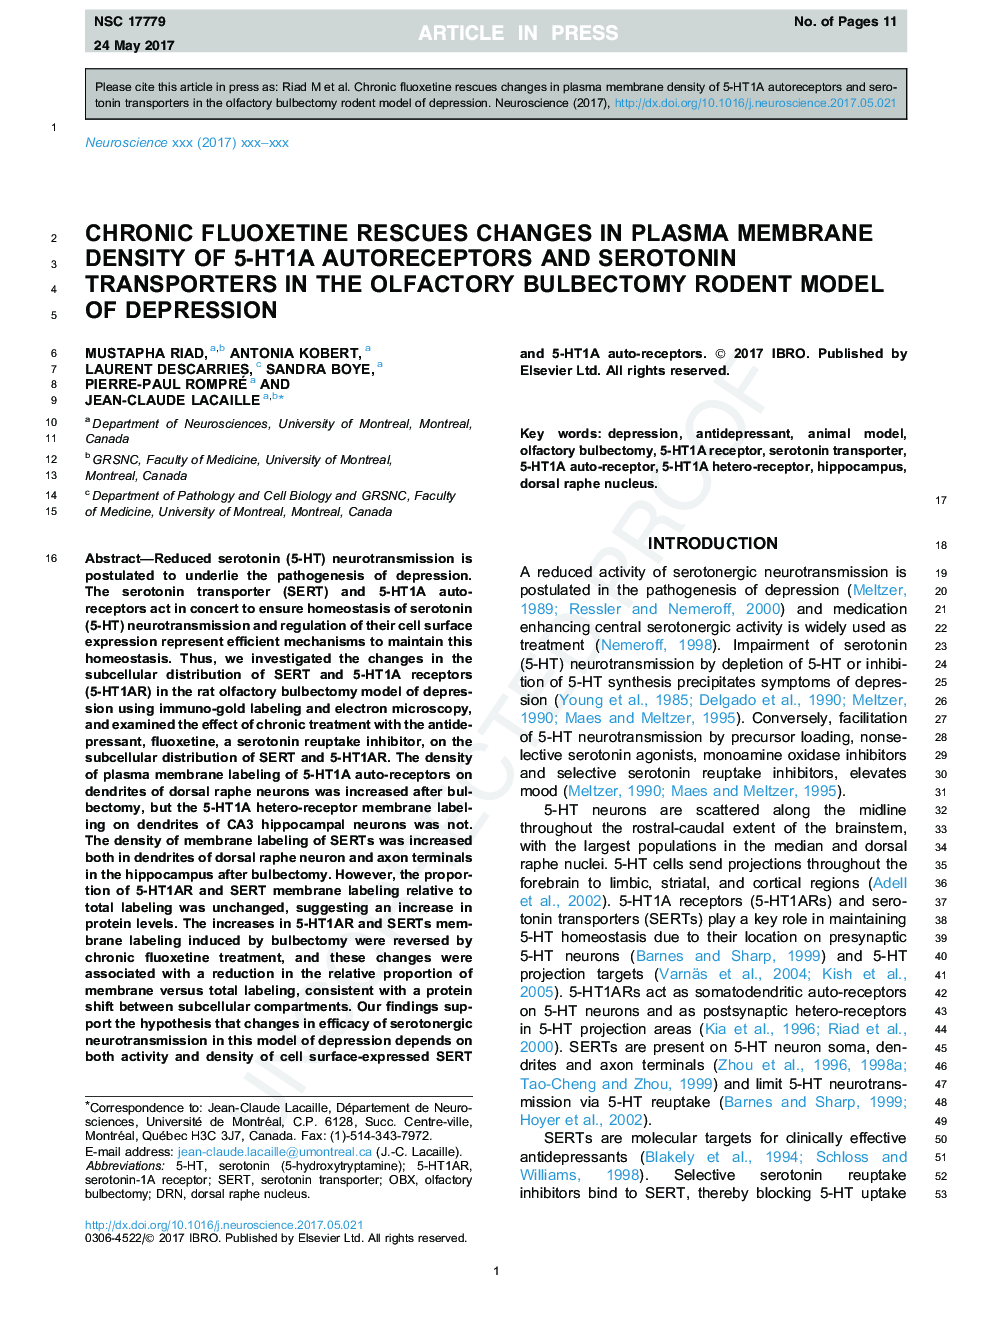 Chronic fluoxetine rescues changes in plasma membrane density of 5-HT1A autoreceptors and serotonin transporters in the olfactory bulbectomy rodent model of depression